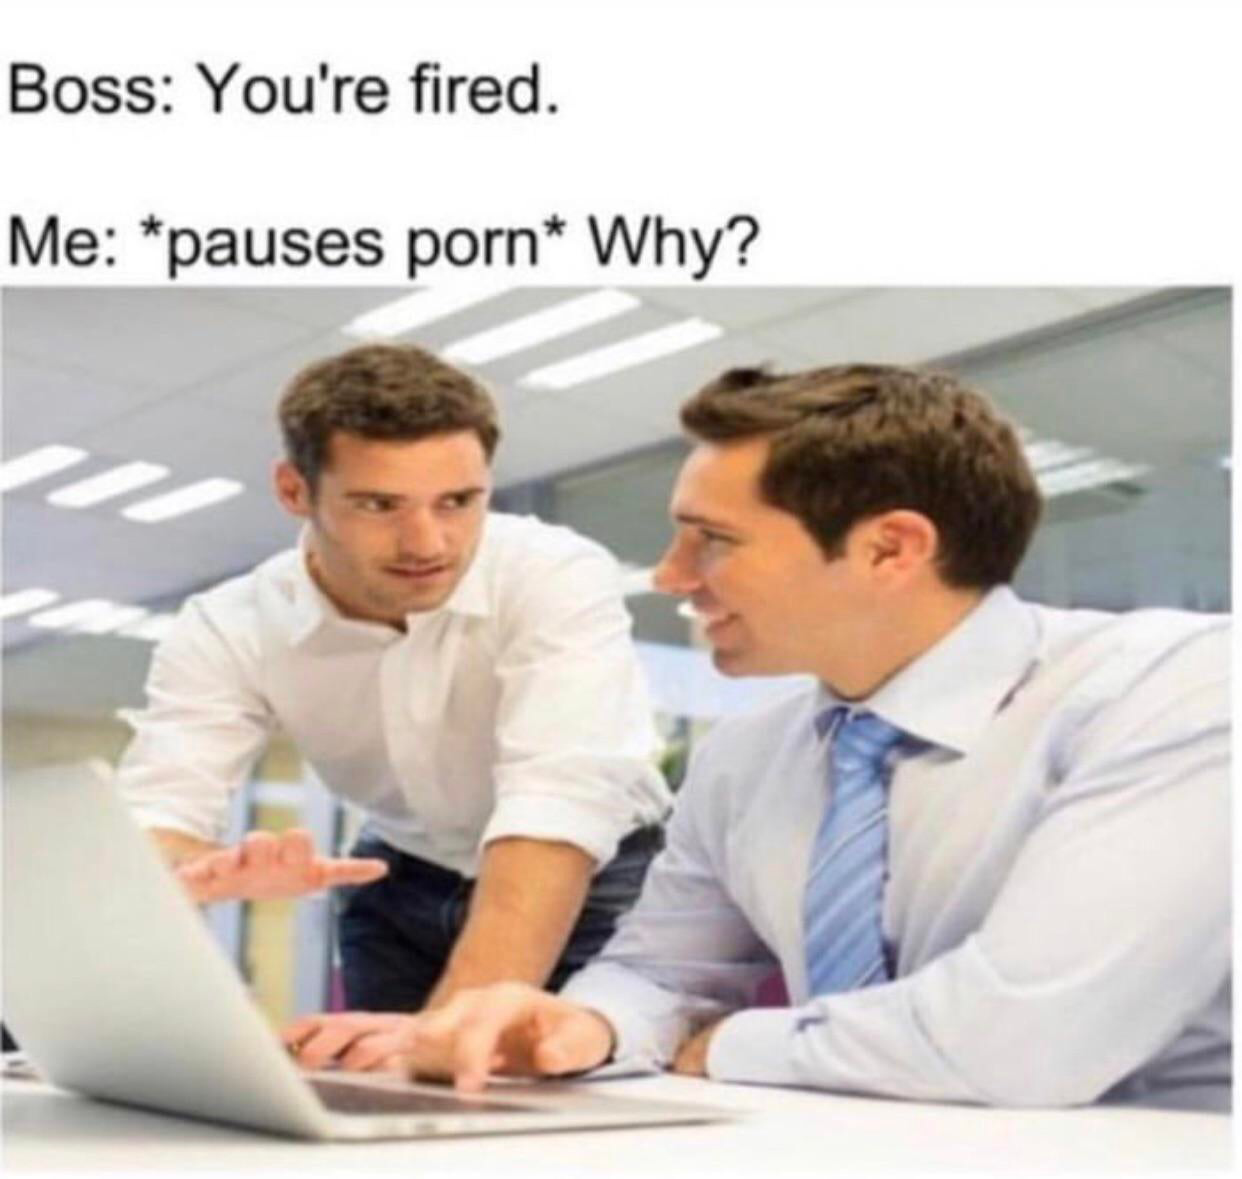 pauses porn meme - Boss You're fired. Me pauses porn Why?